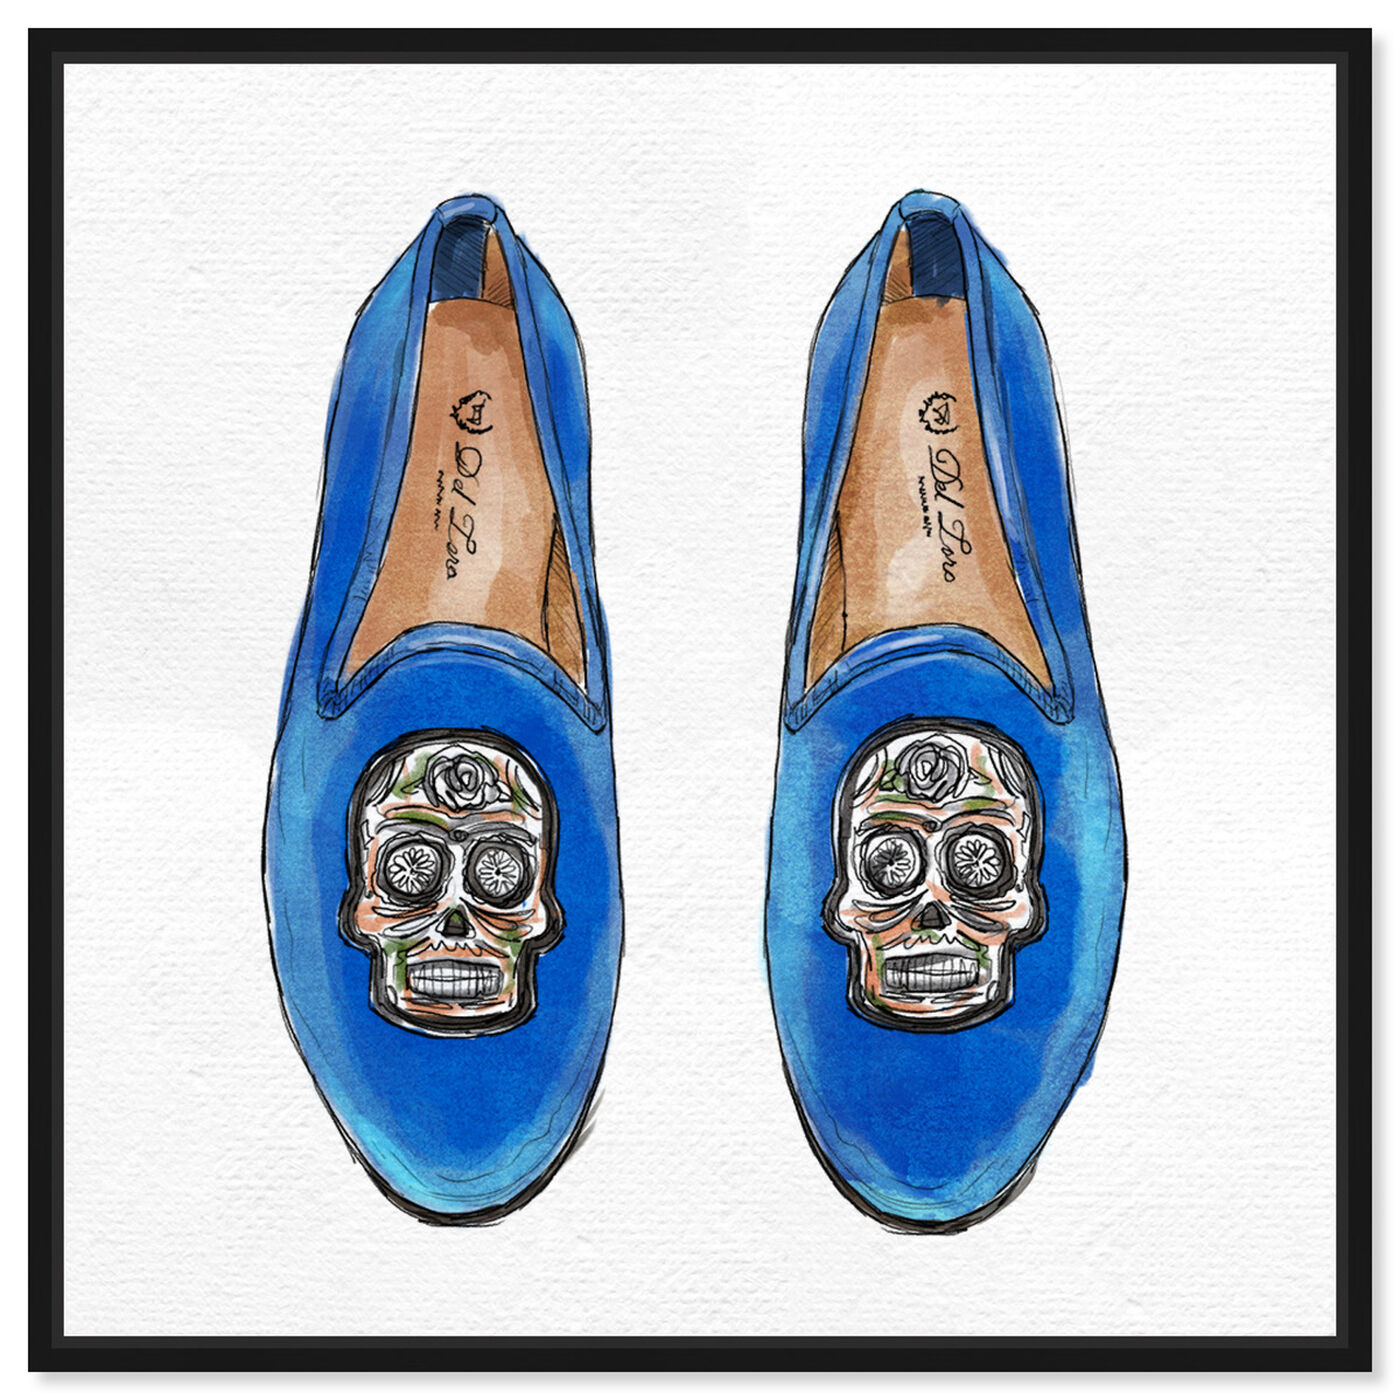 Front view of Skull Slippers featuring fashion and glam and shoes art.